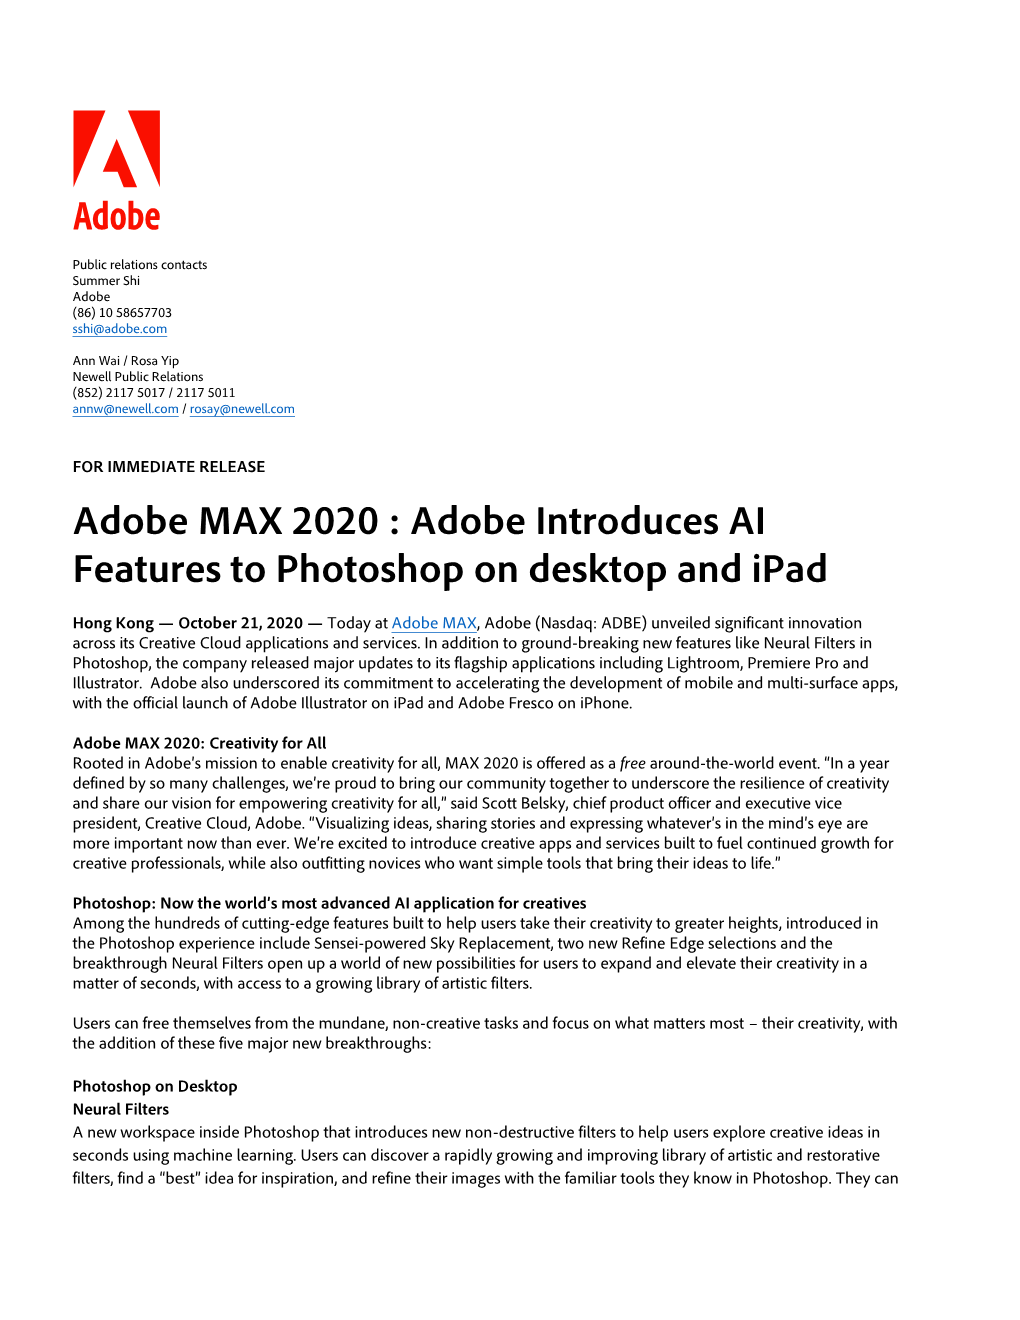 Adobe MAX 2020 : Adobe Introduces AI Features to Photoshop on Desktop and Ipad